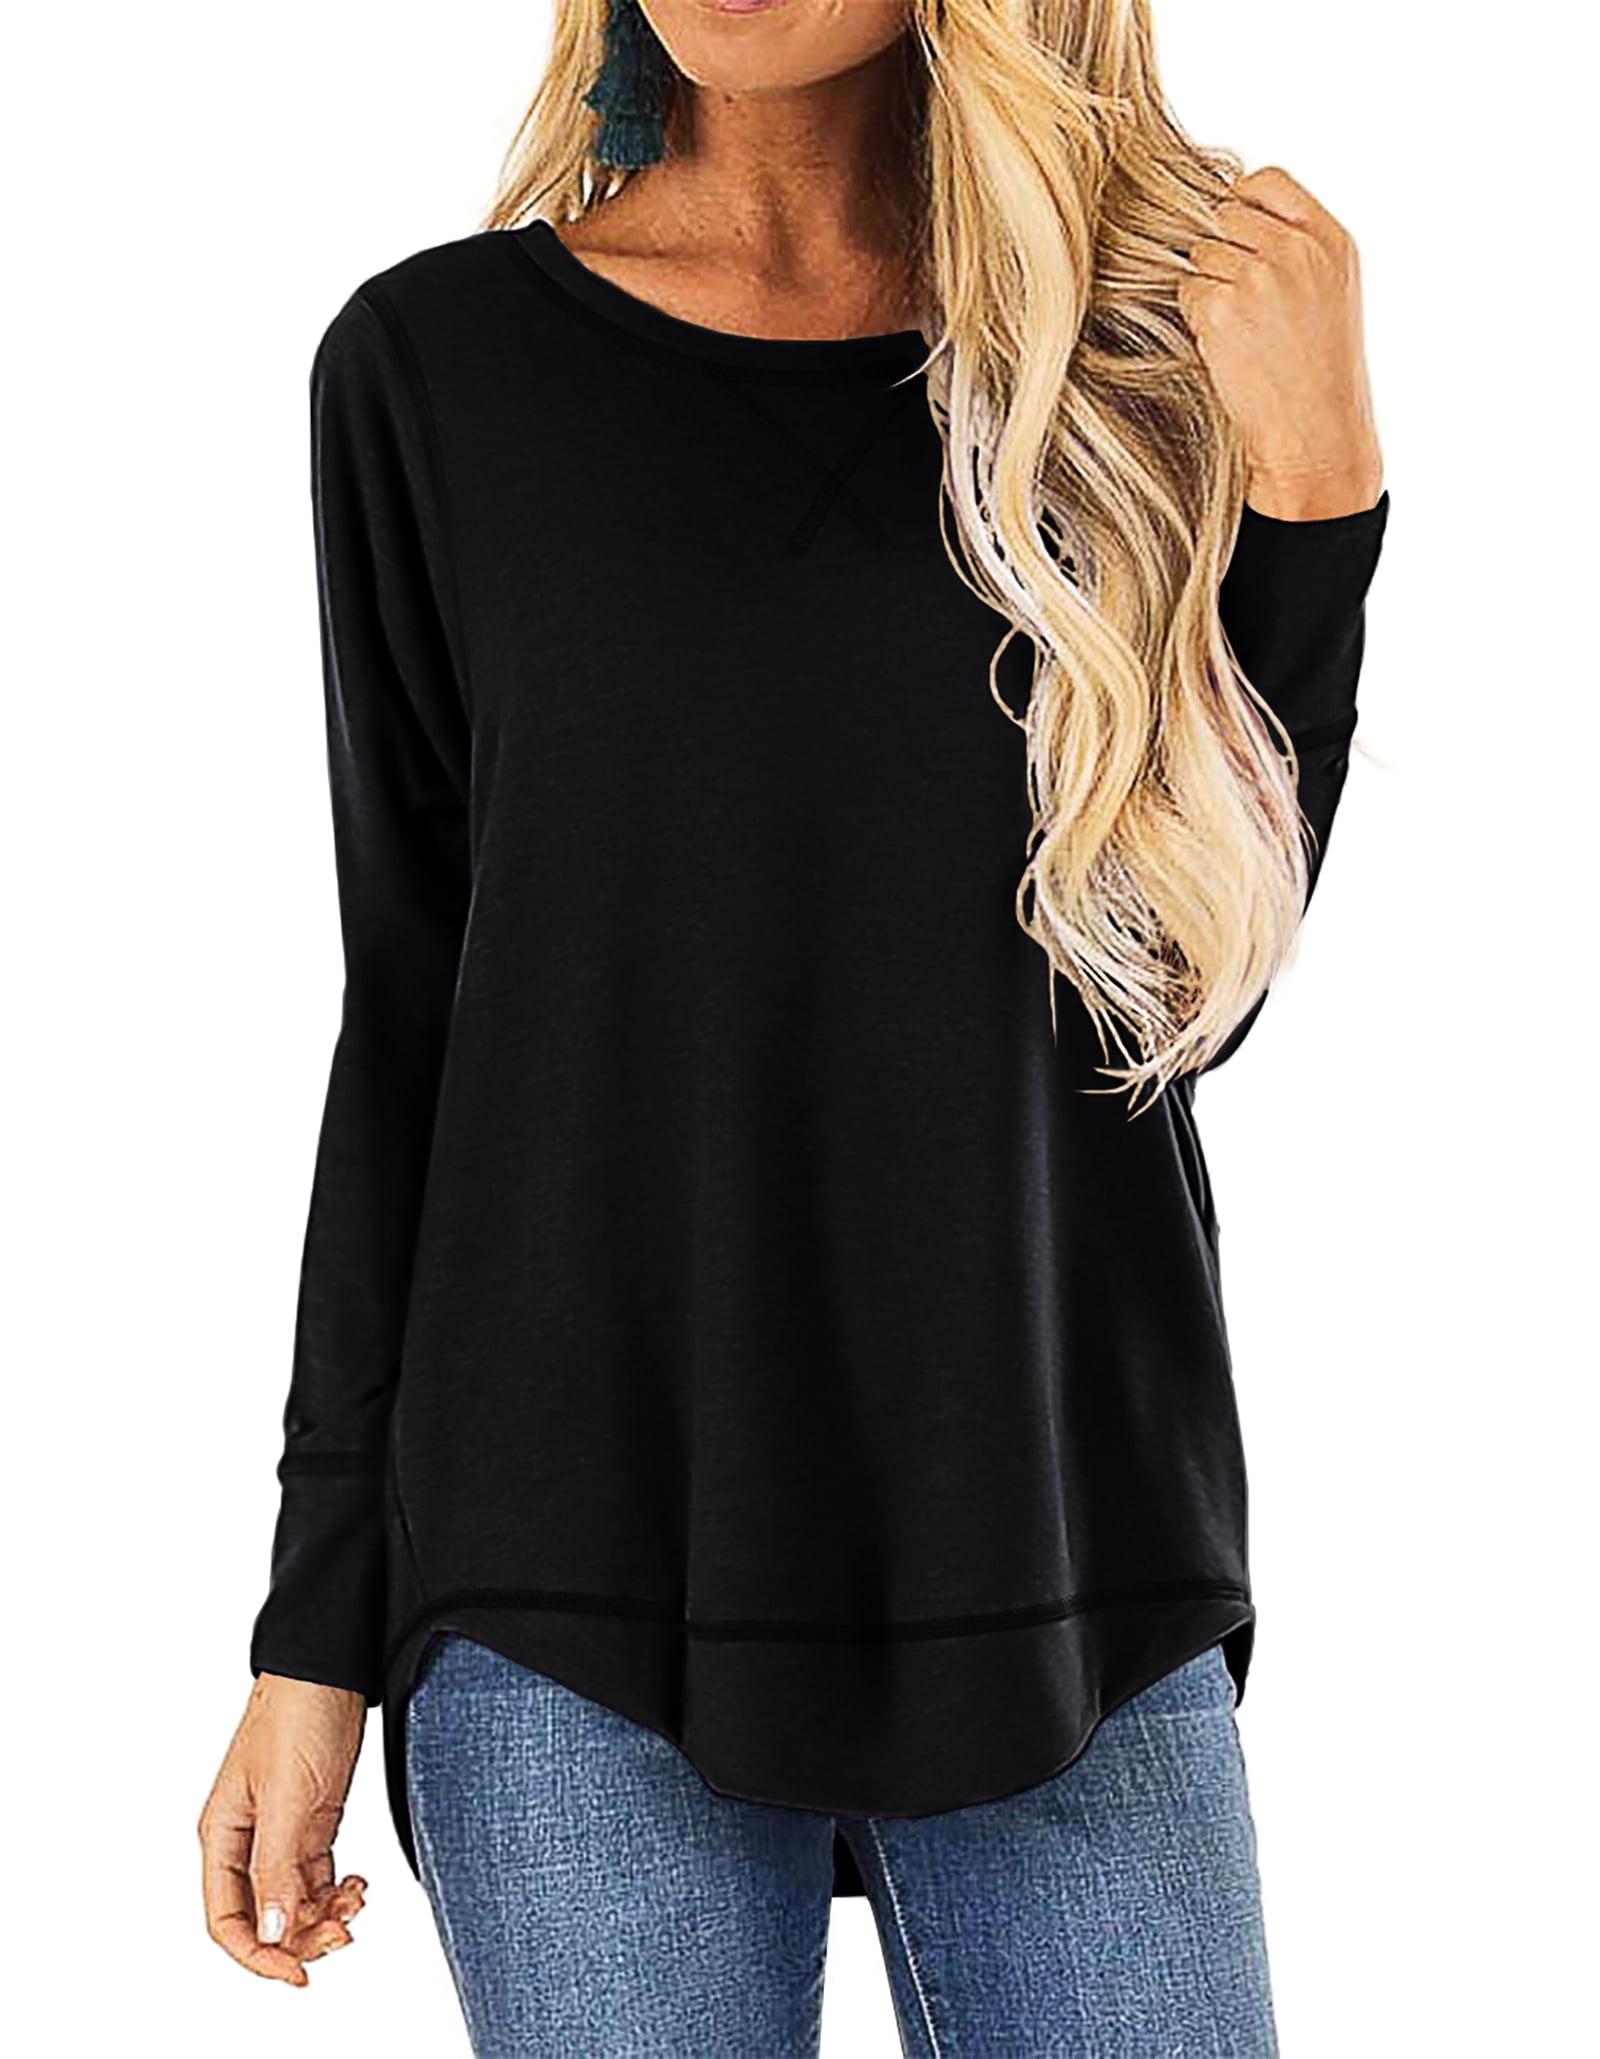 HOWCOME Fall Long Sleeve Side Split Casual Loose Tunic Womens Blouses ...